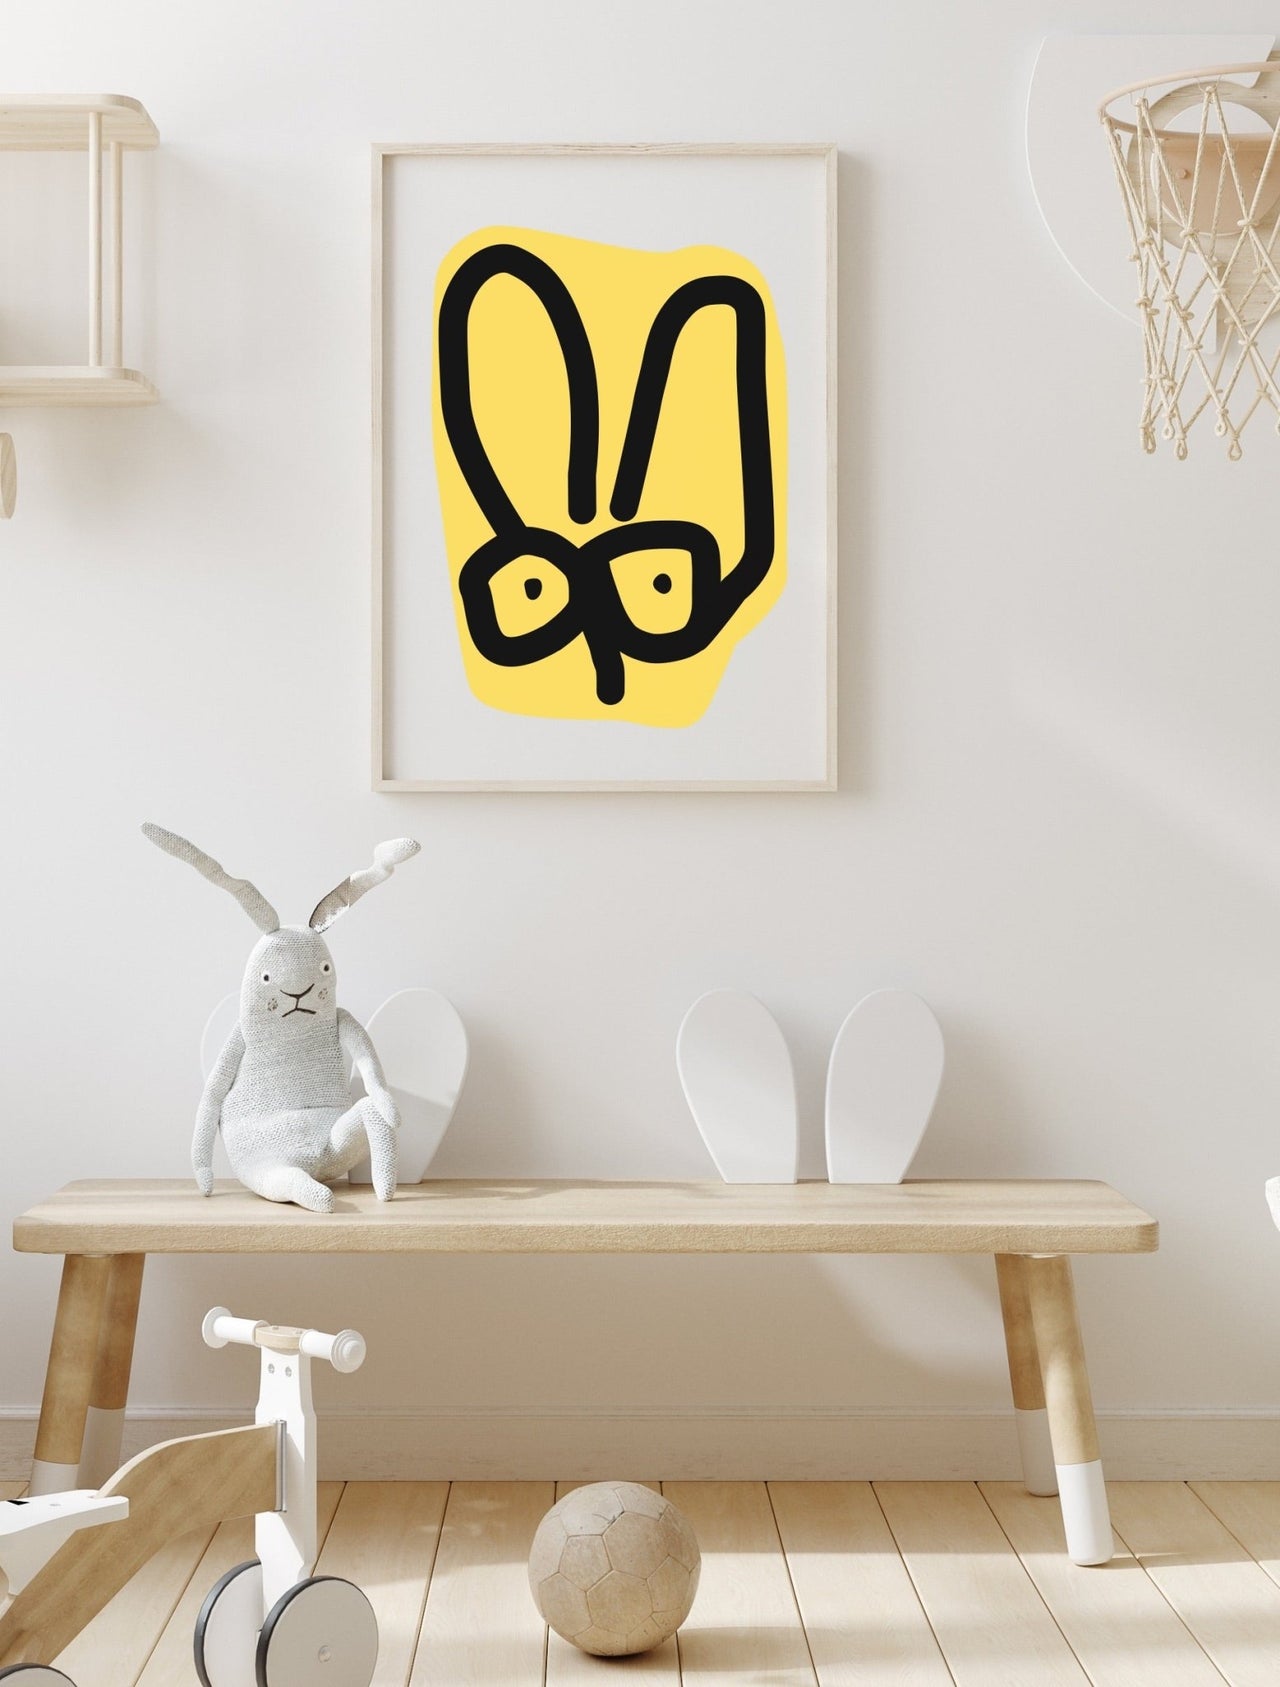 WASP ILLUSTRATION GRAPHIC ART PRINT WITH A WHITE BACKGROUND SET IN A KIDS BEDROOM